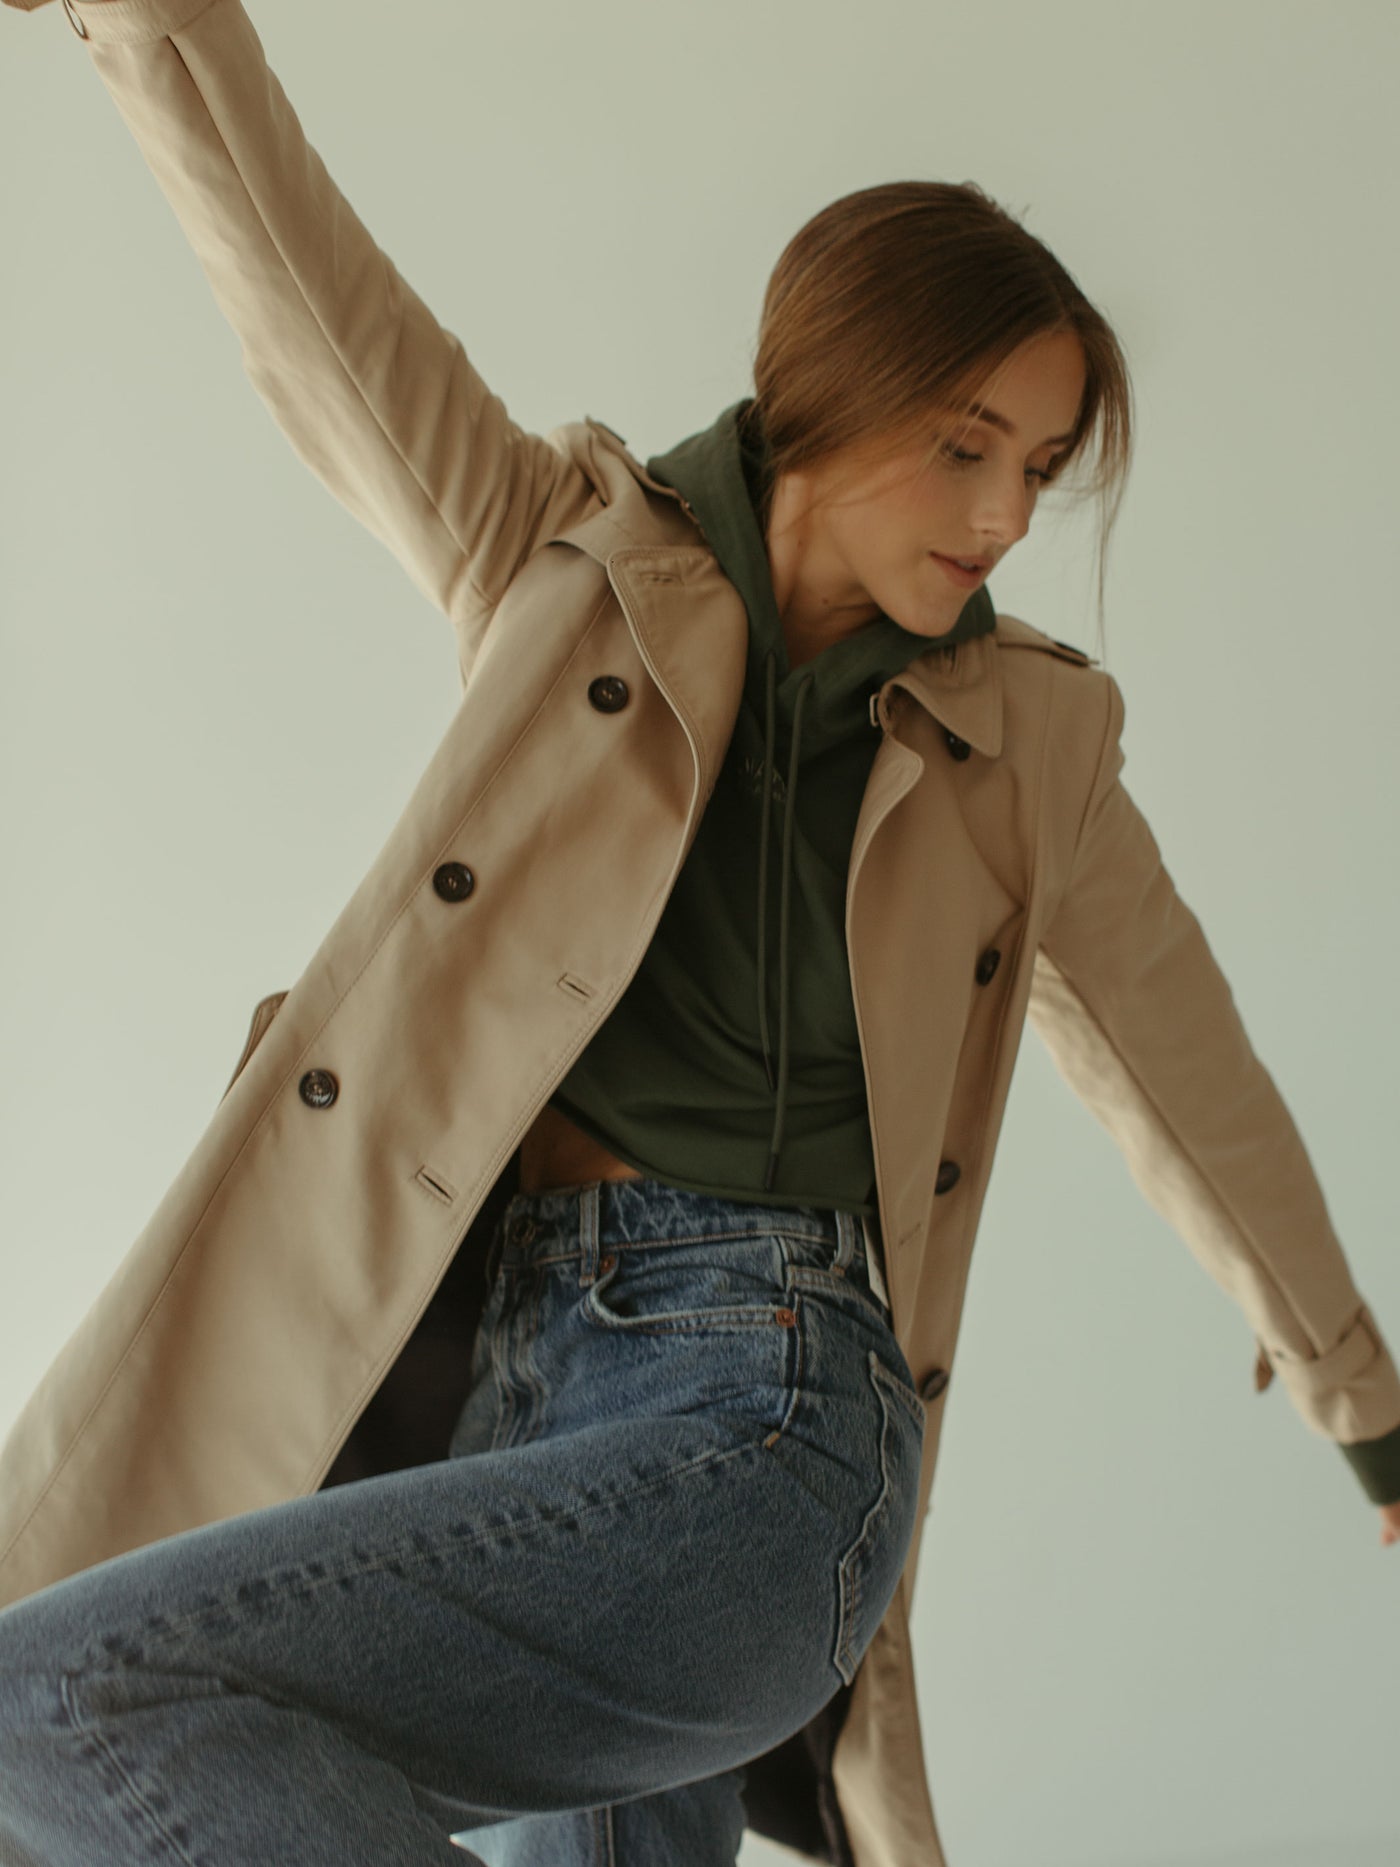 sage cropped hoodie with brand logo and embroidery detail with trenchcoat and relaxed blue jeans